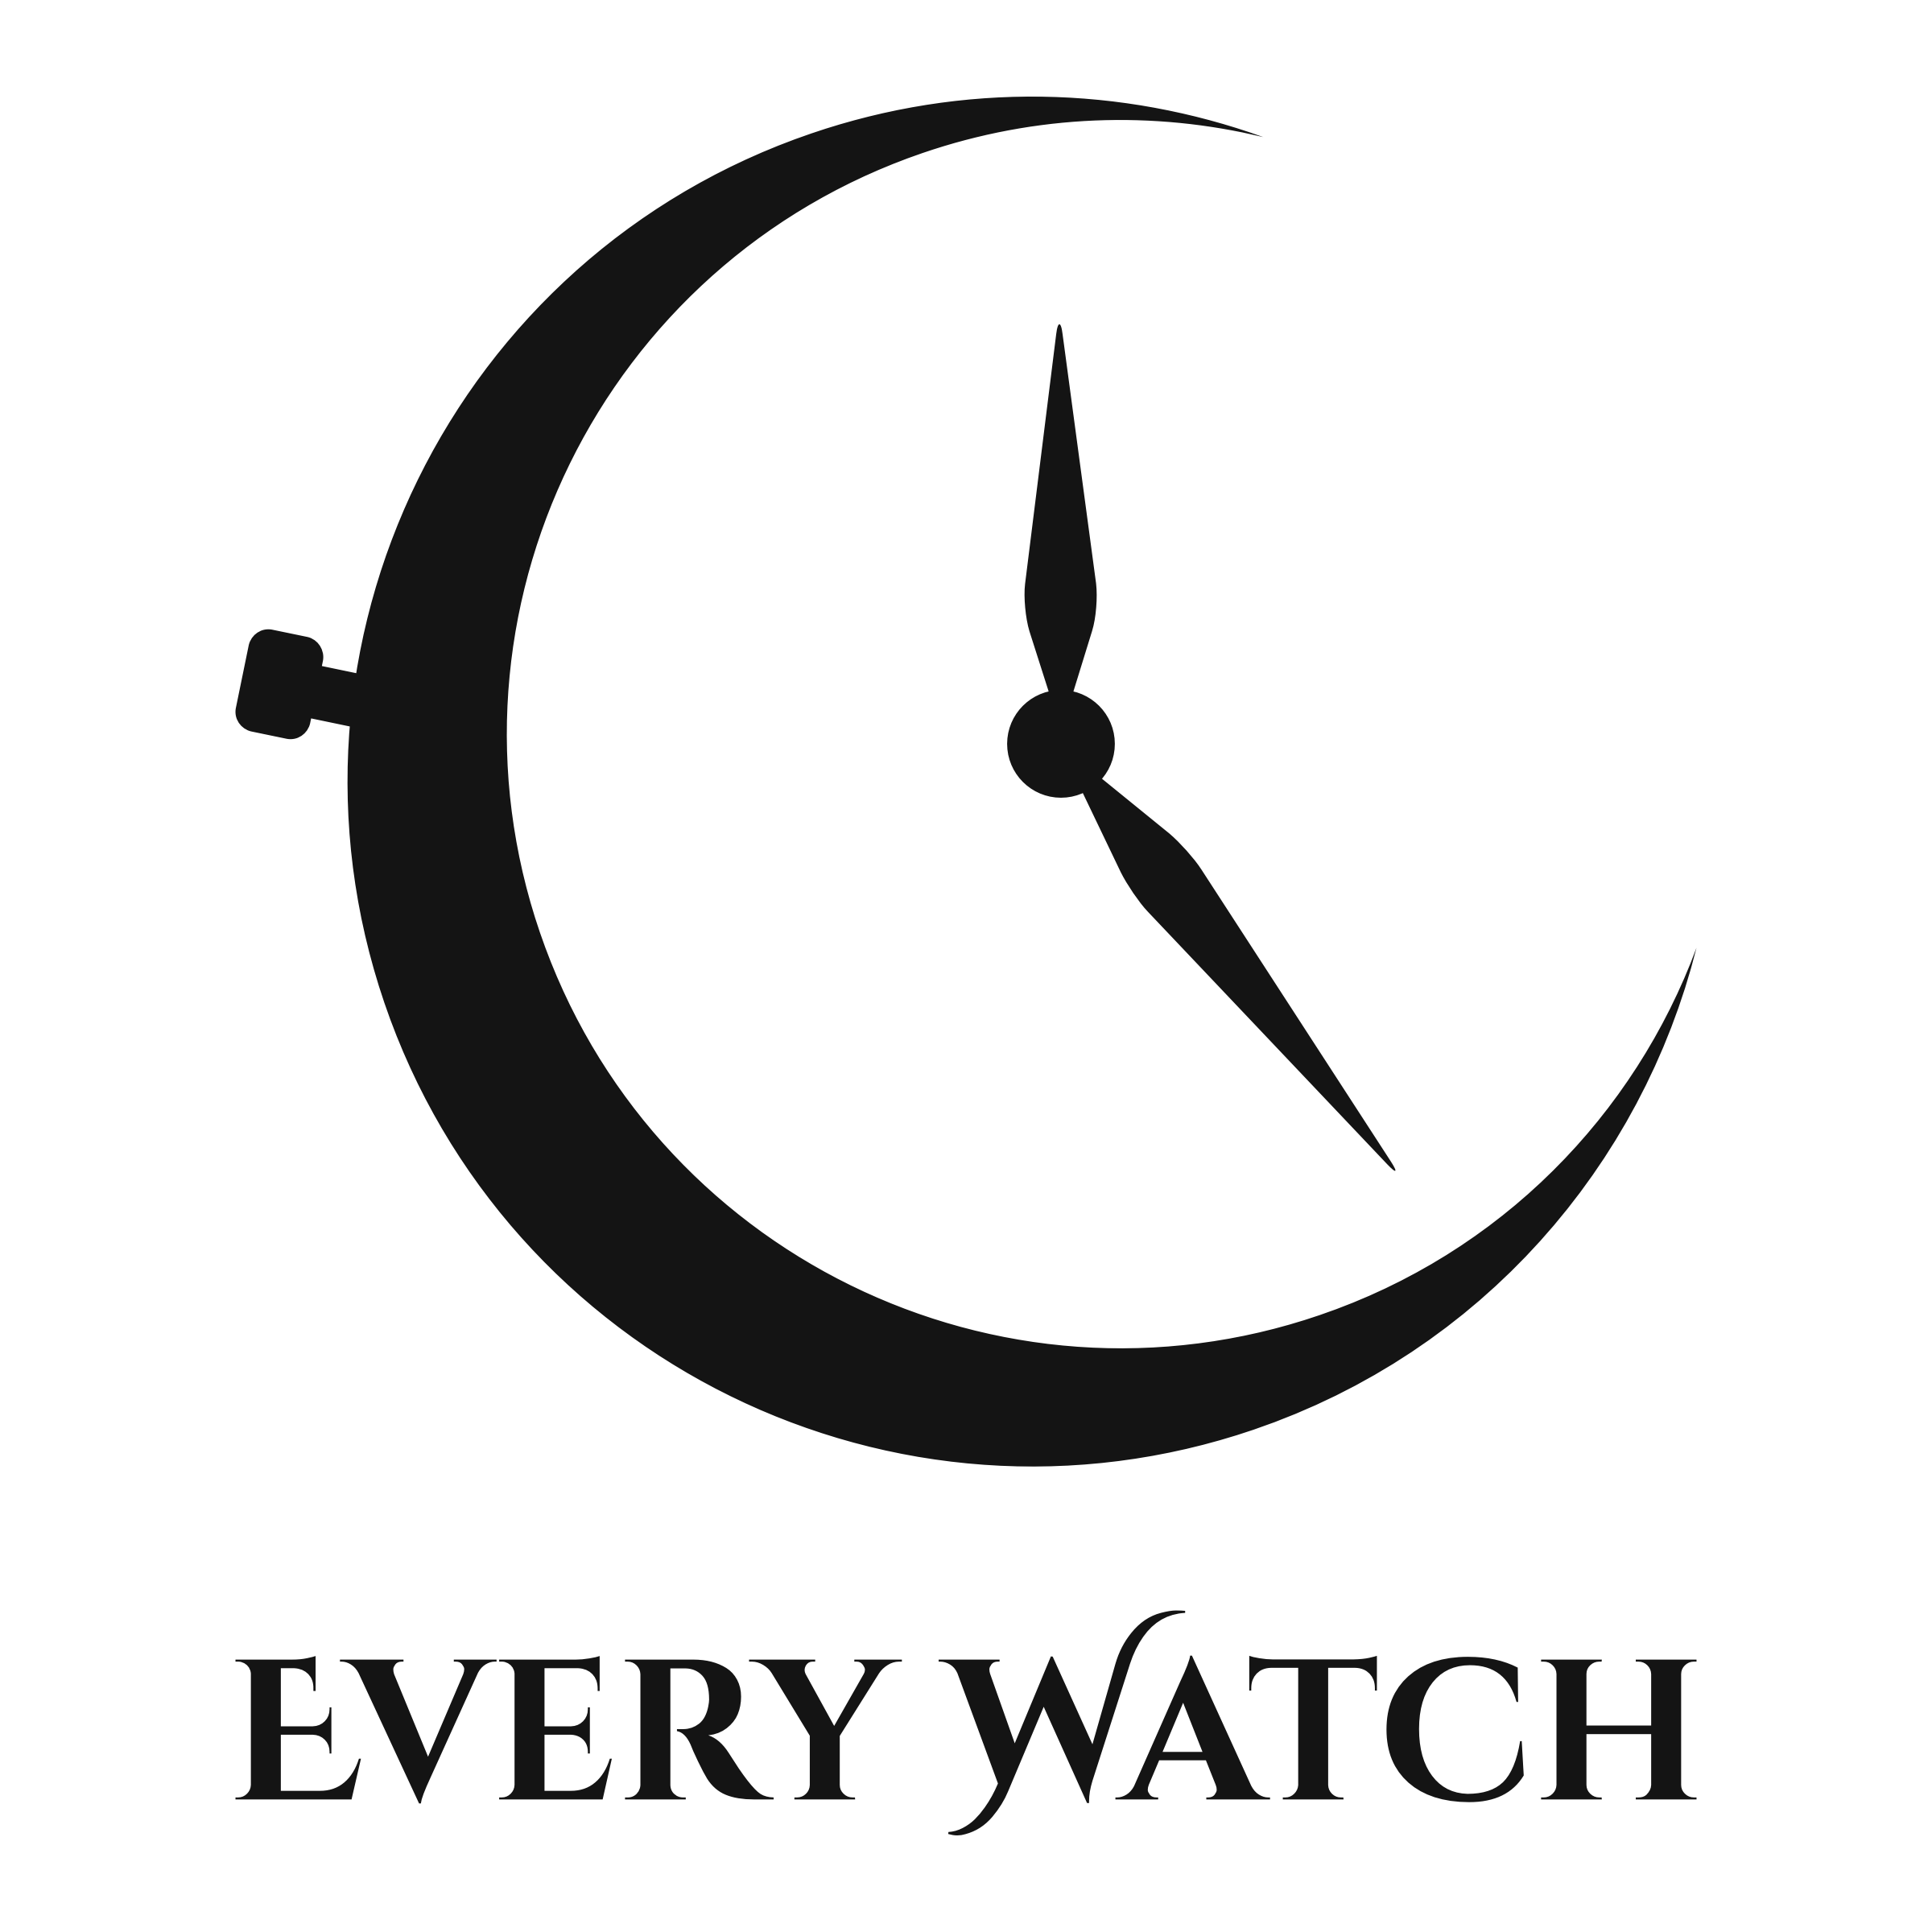 watch logo images